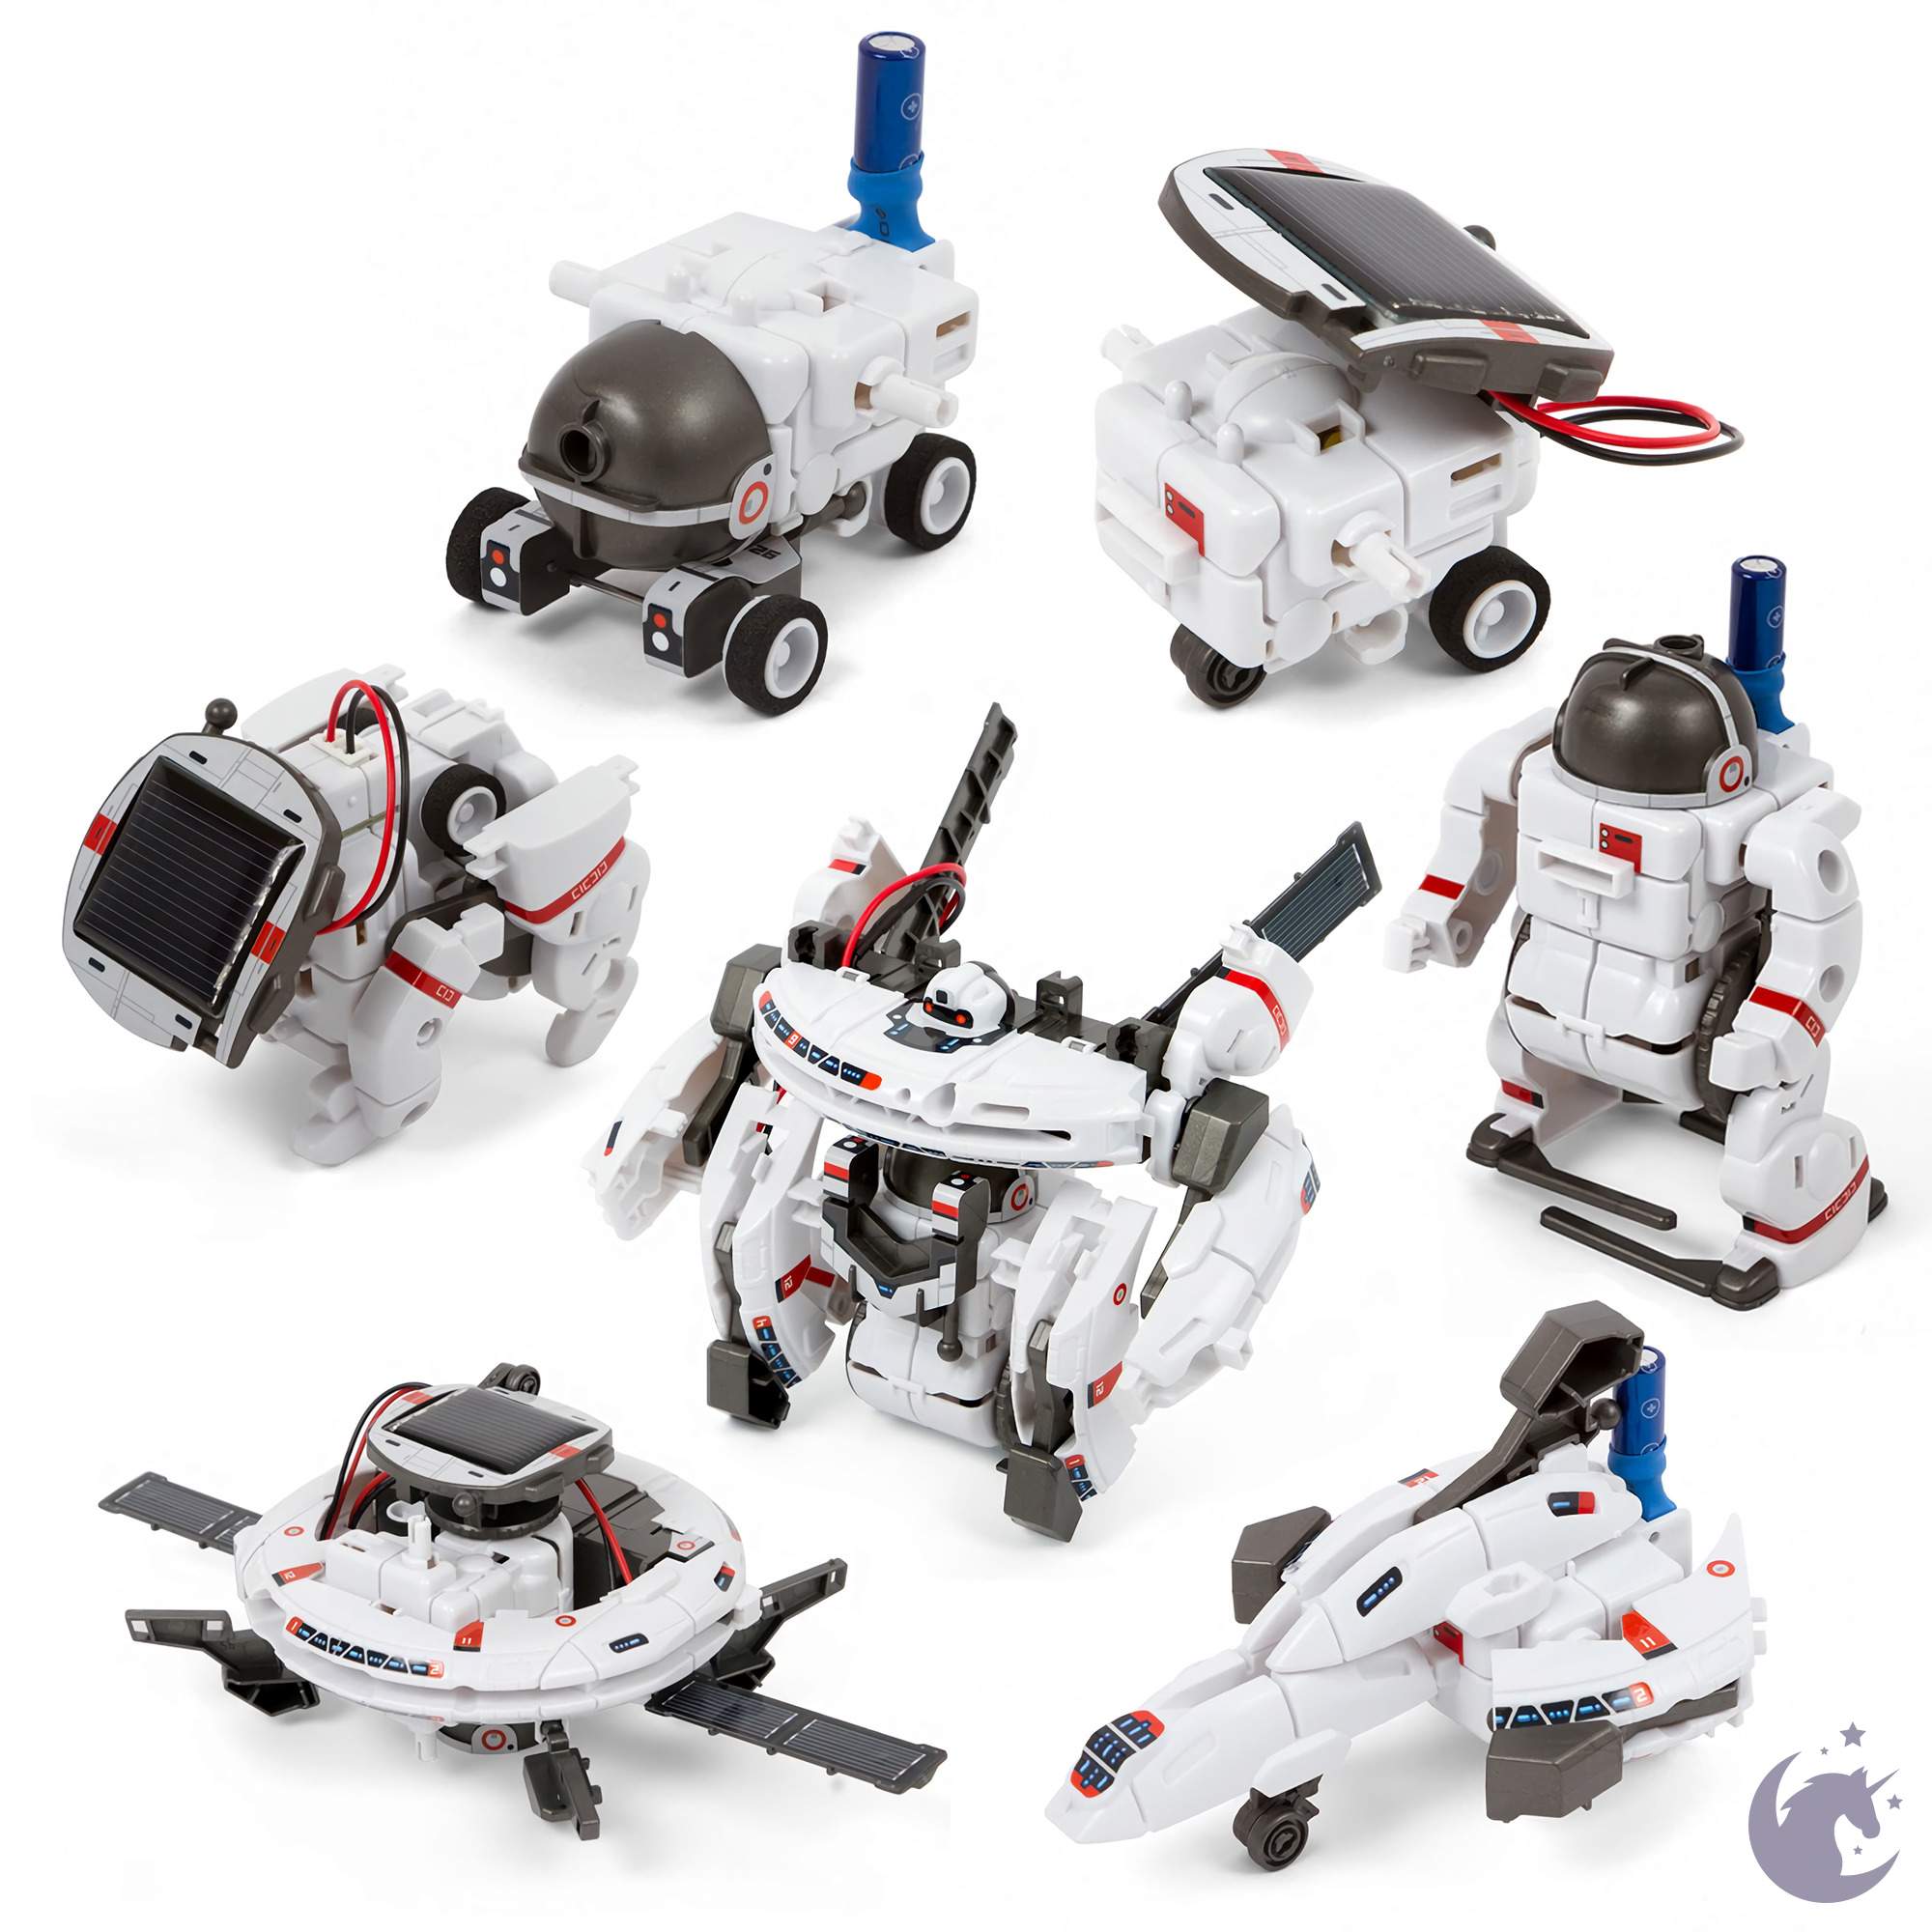 unicorntoys cic kits 7 in 1 solar rechargeable space fleet educational robot kit engineering stem toys for kids CIC21-647